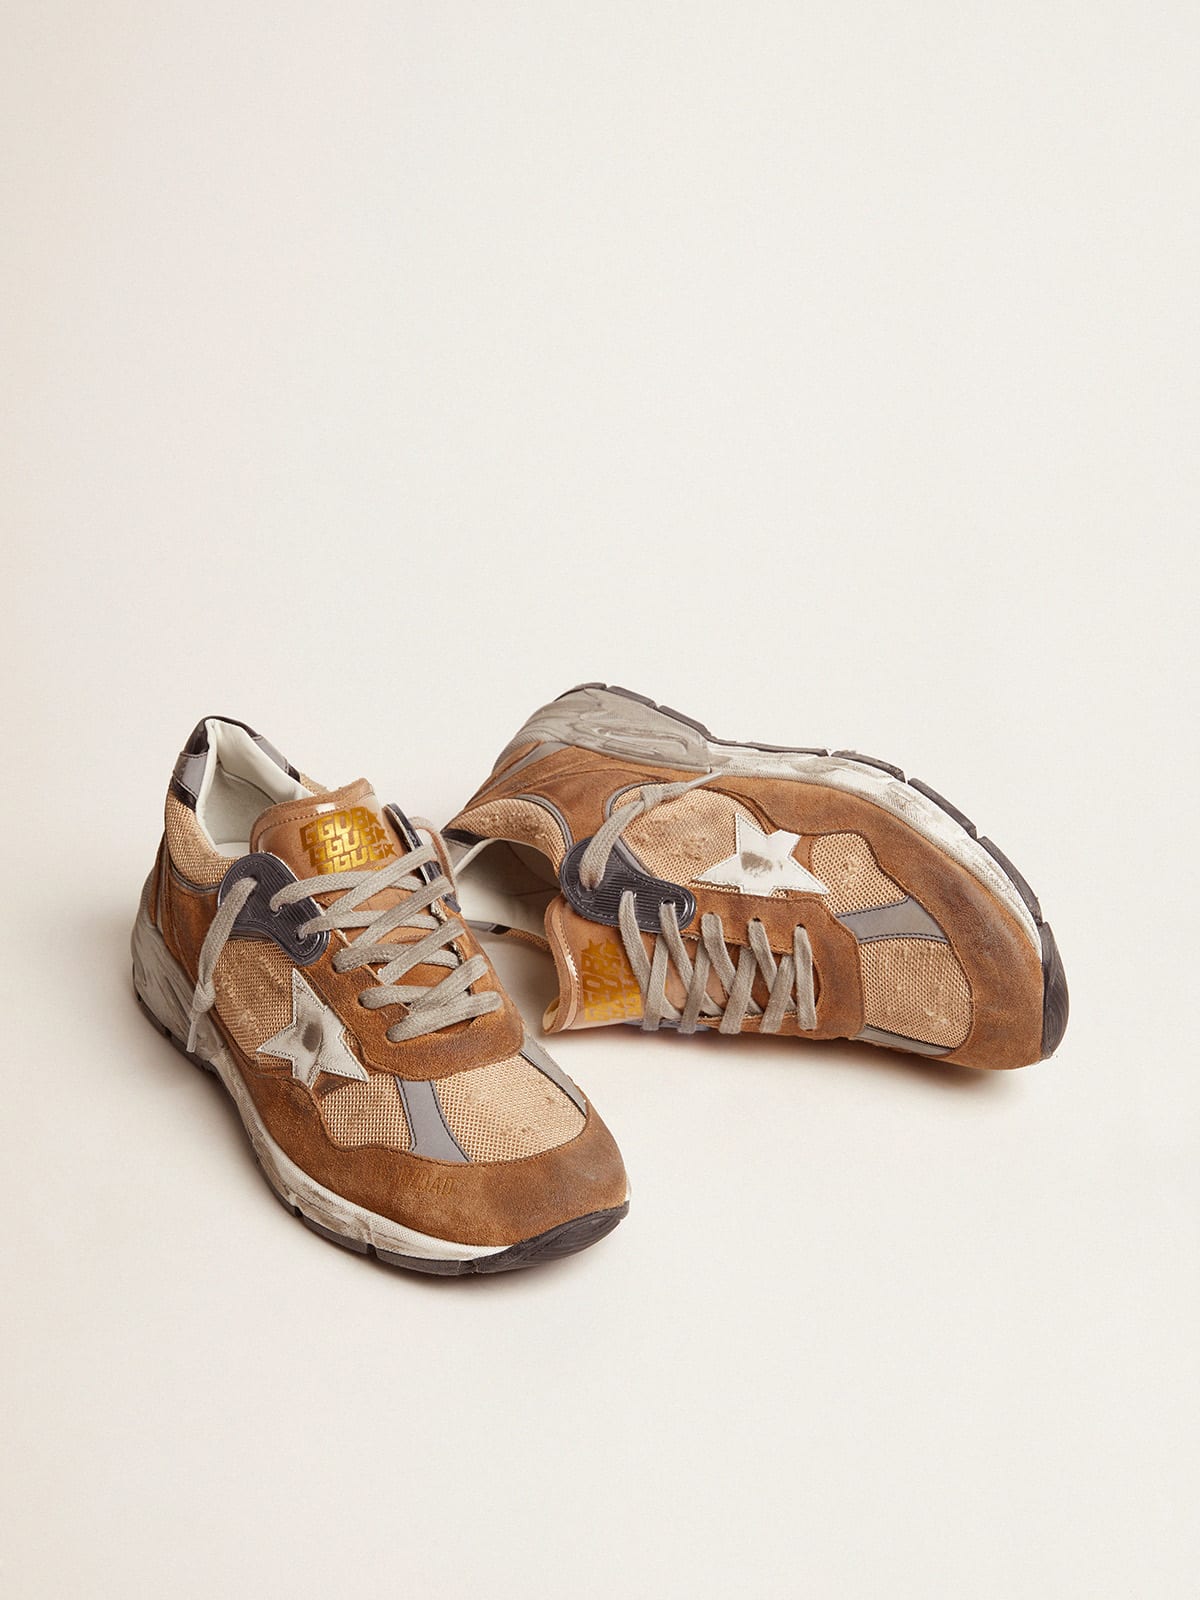 Golden Goose - Dad-Star sneakers in tobacco-colored mesh and suede with white leather star and black leather heel tab in 